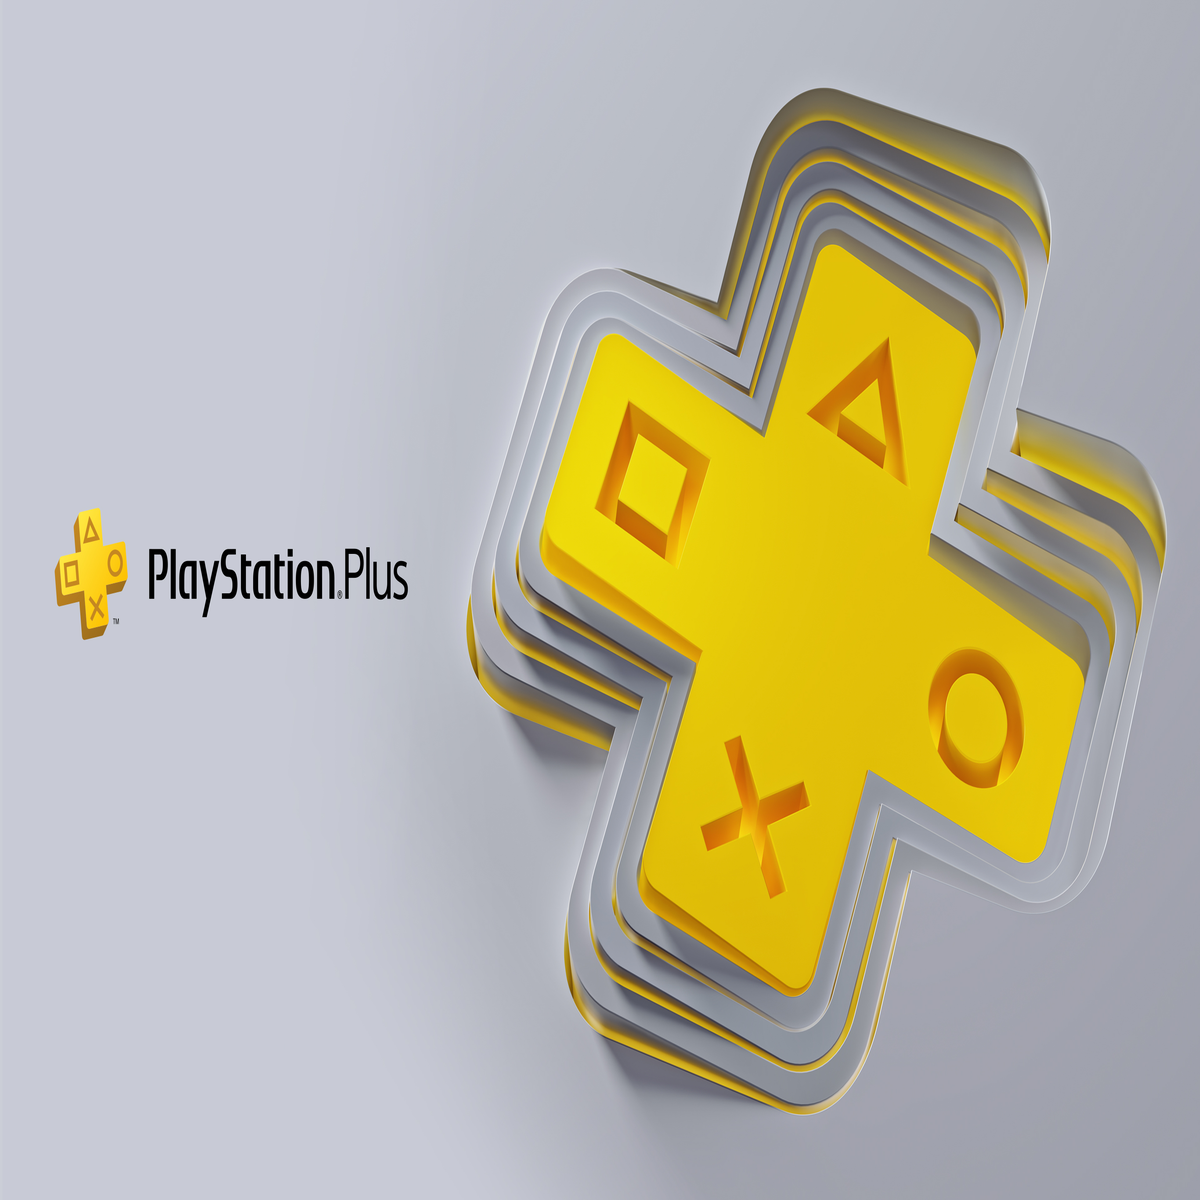 PS Plus Premium subscribers can now stream up to 100 Sony movies